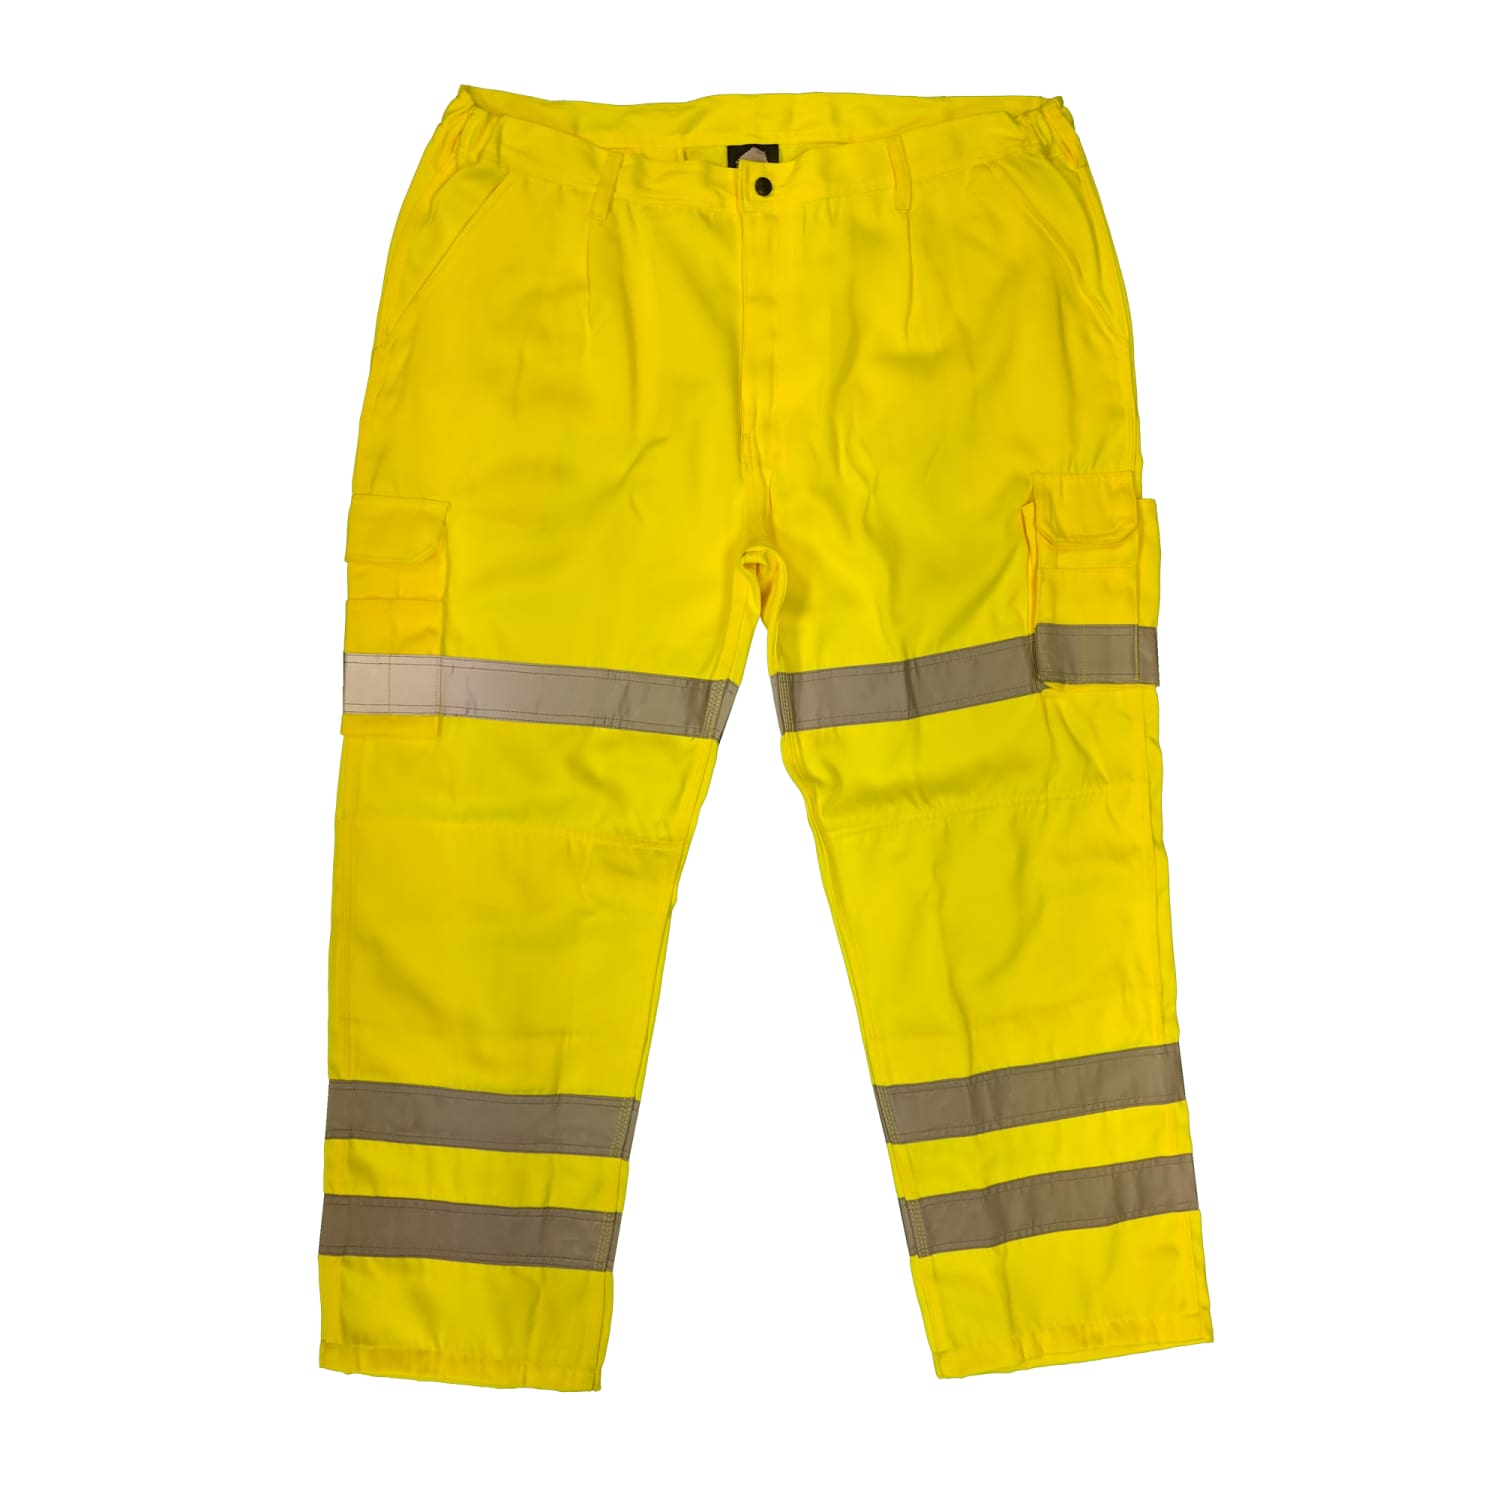 Orn - 6900 - HiVis Trousers - Yellow 1